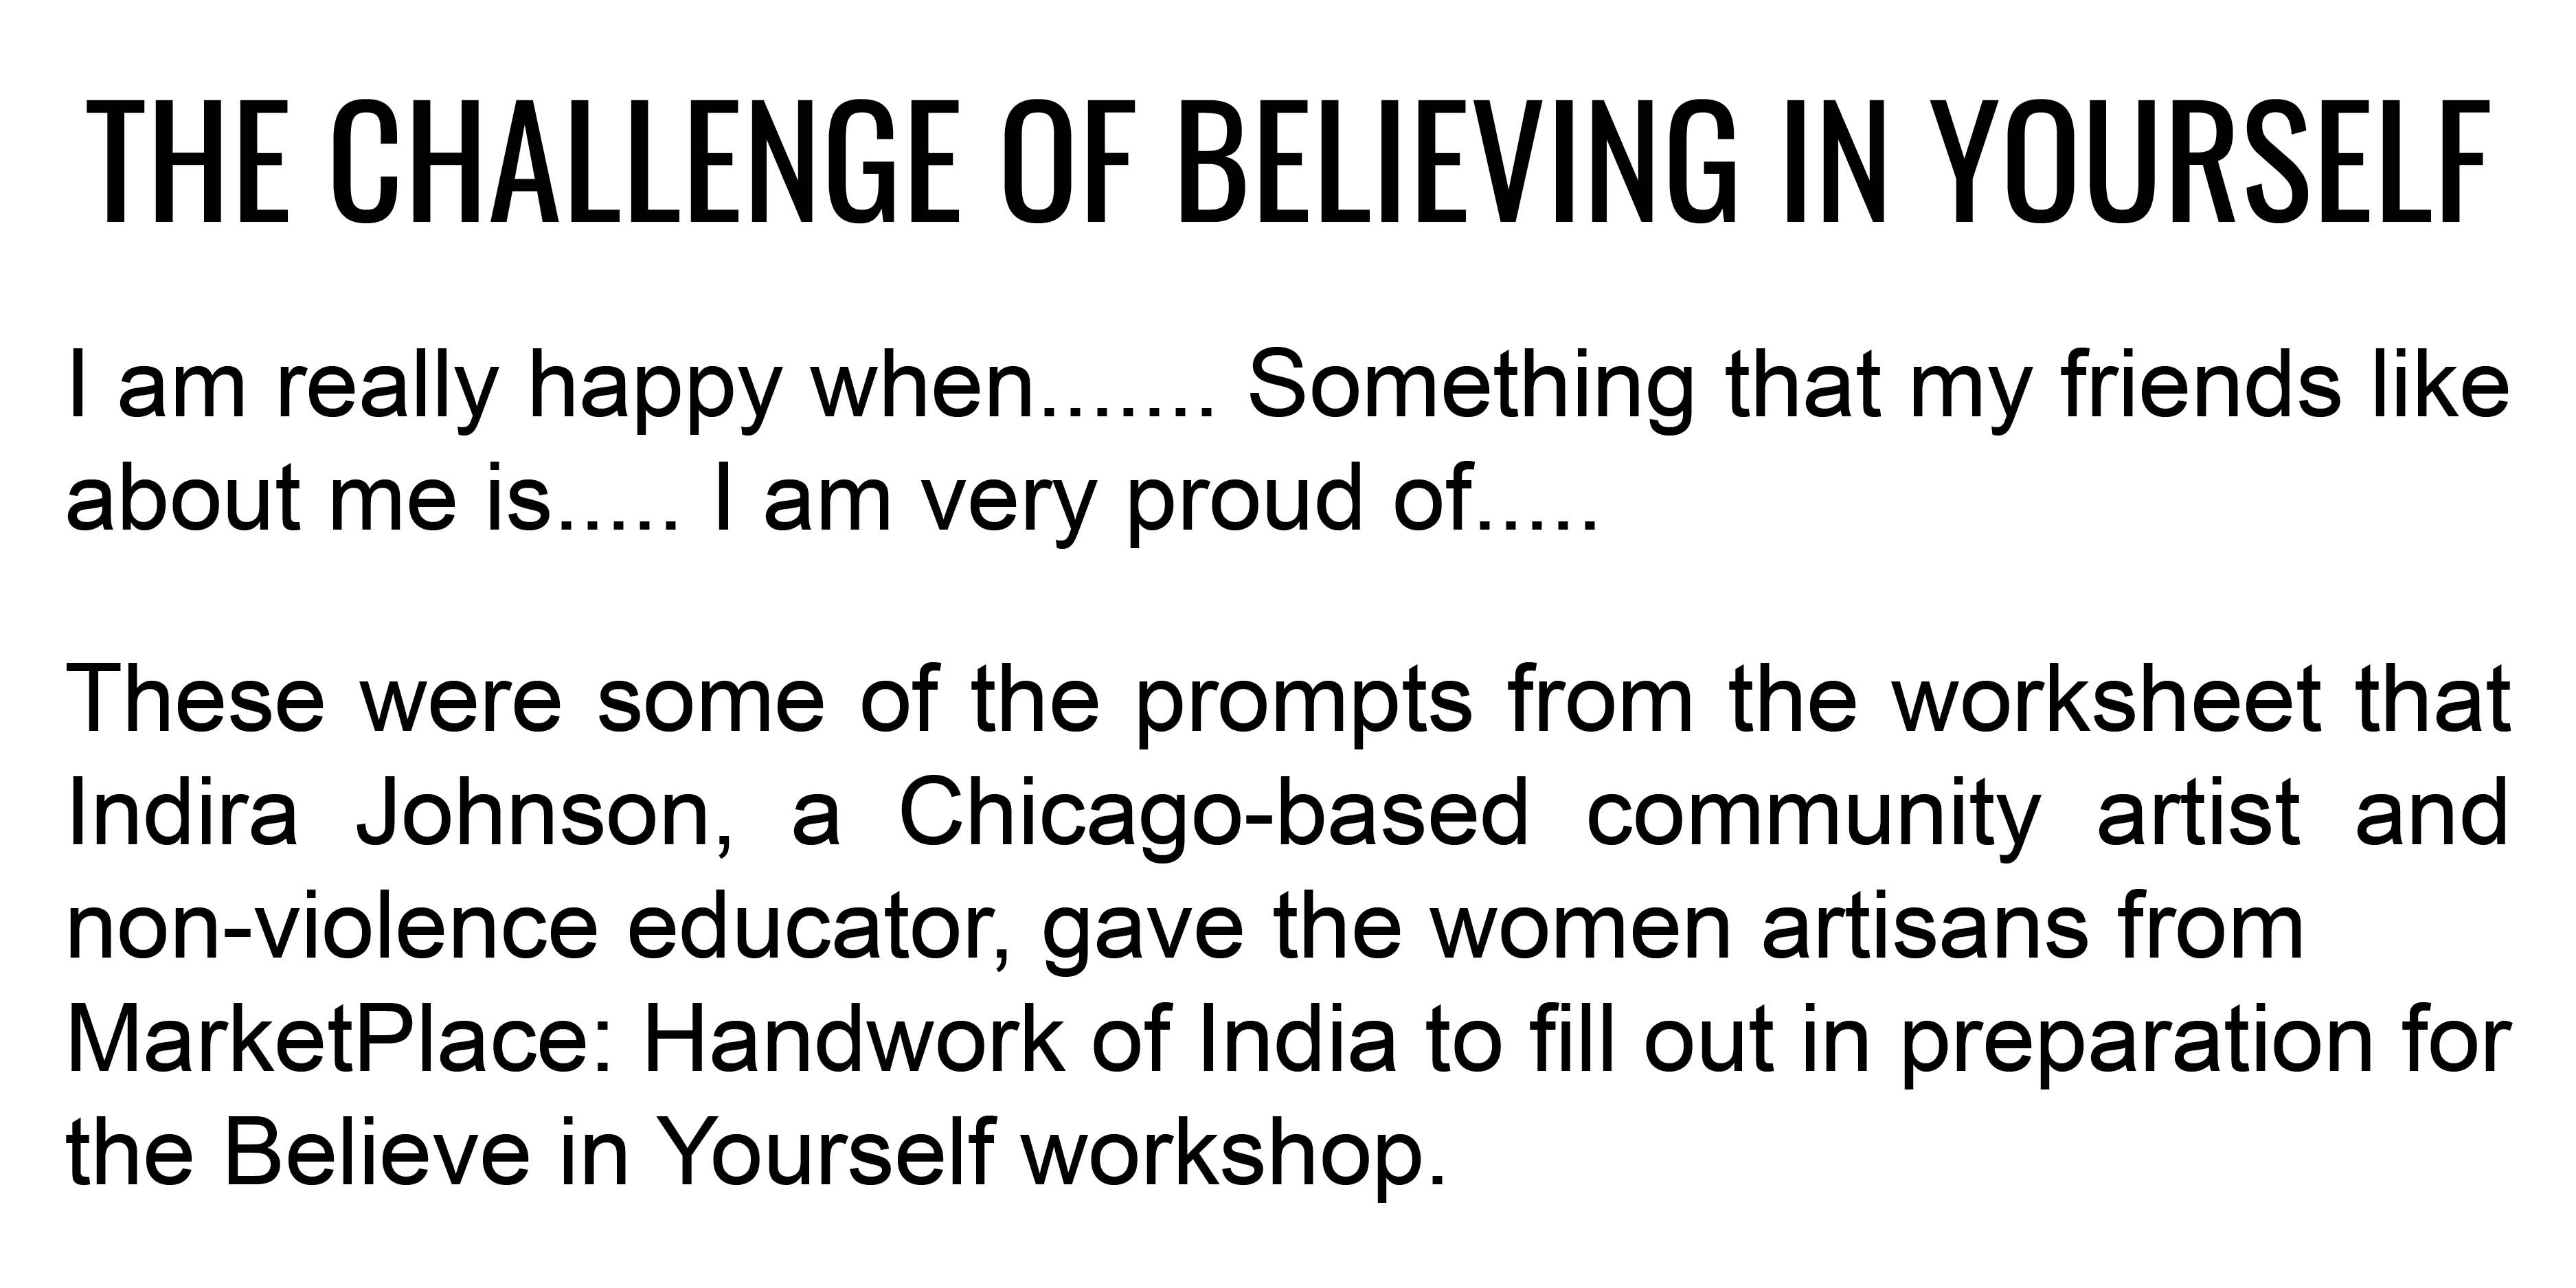 THE CHALLENGE OF BELIEVING IN YOURSELF  I am really happy when....... Something that my friends like about me is..... I am very proud of.....  These were some of the prompts from the worksheet that Indira Johnson, a Chicago-based community
artist and non-violence educator, gave the women artisans from Marketplace Handwork of India to fill out in preparation for the Believe in Yourself workshop.